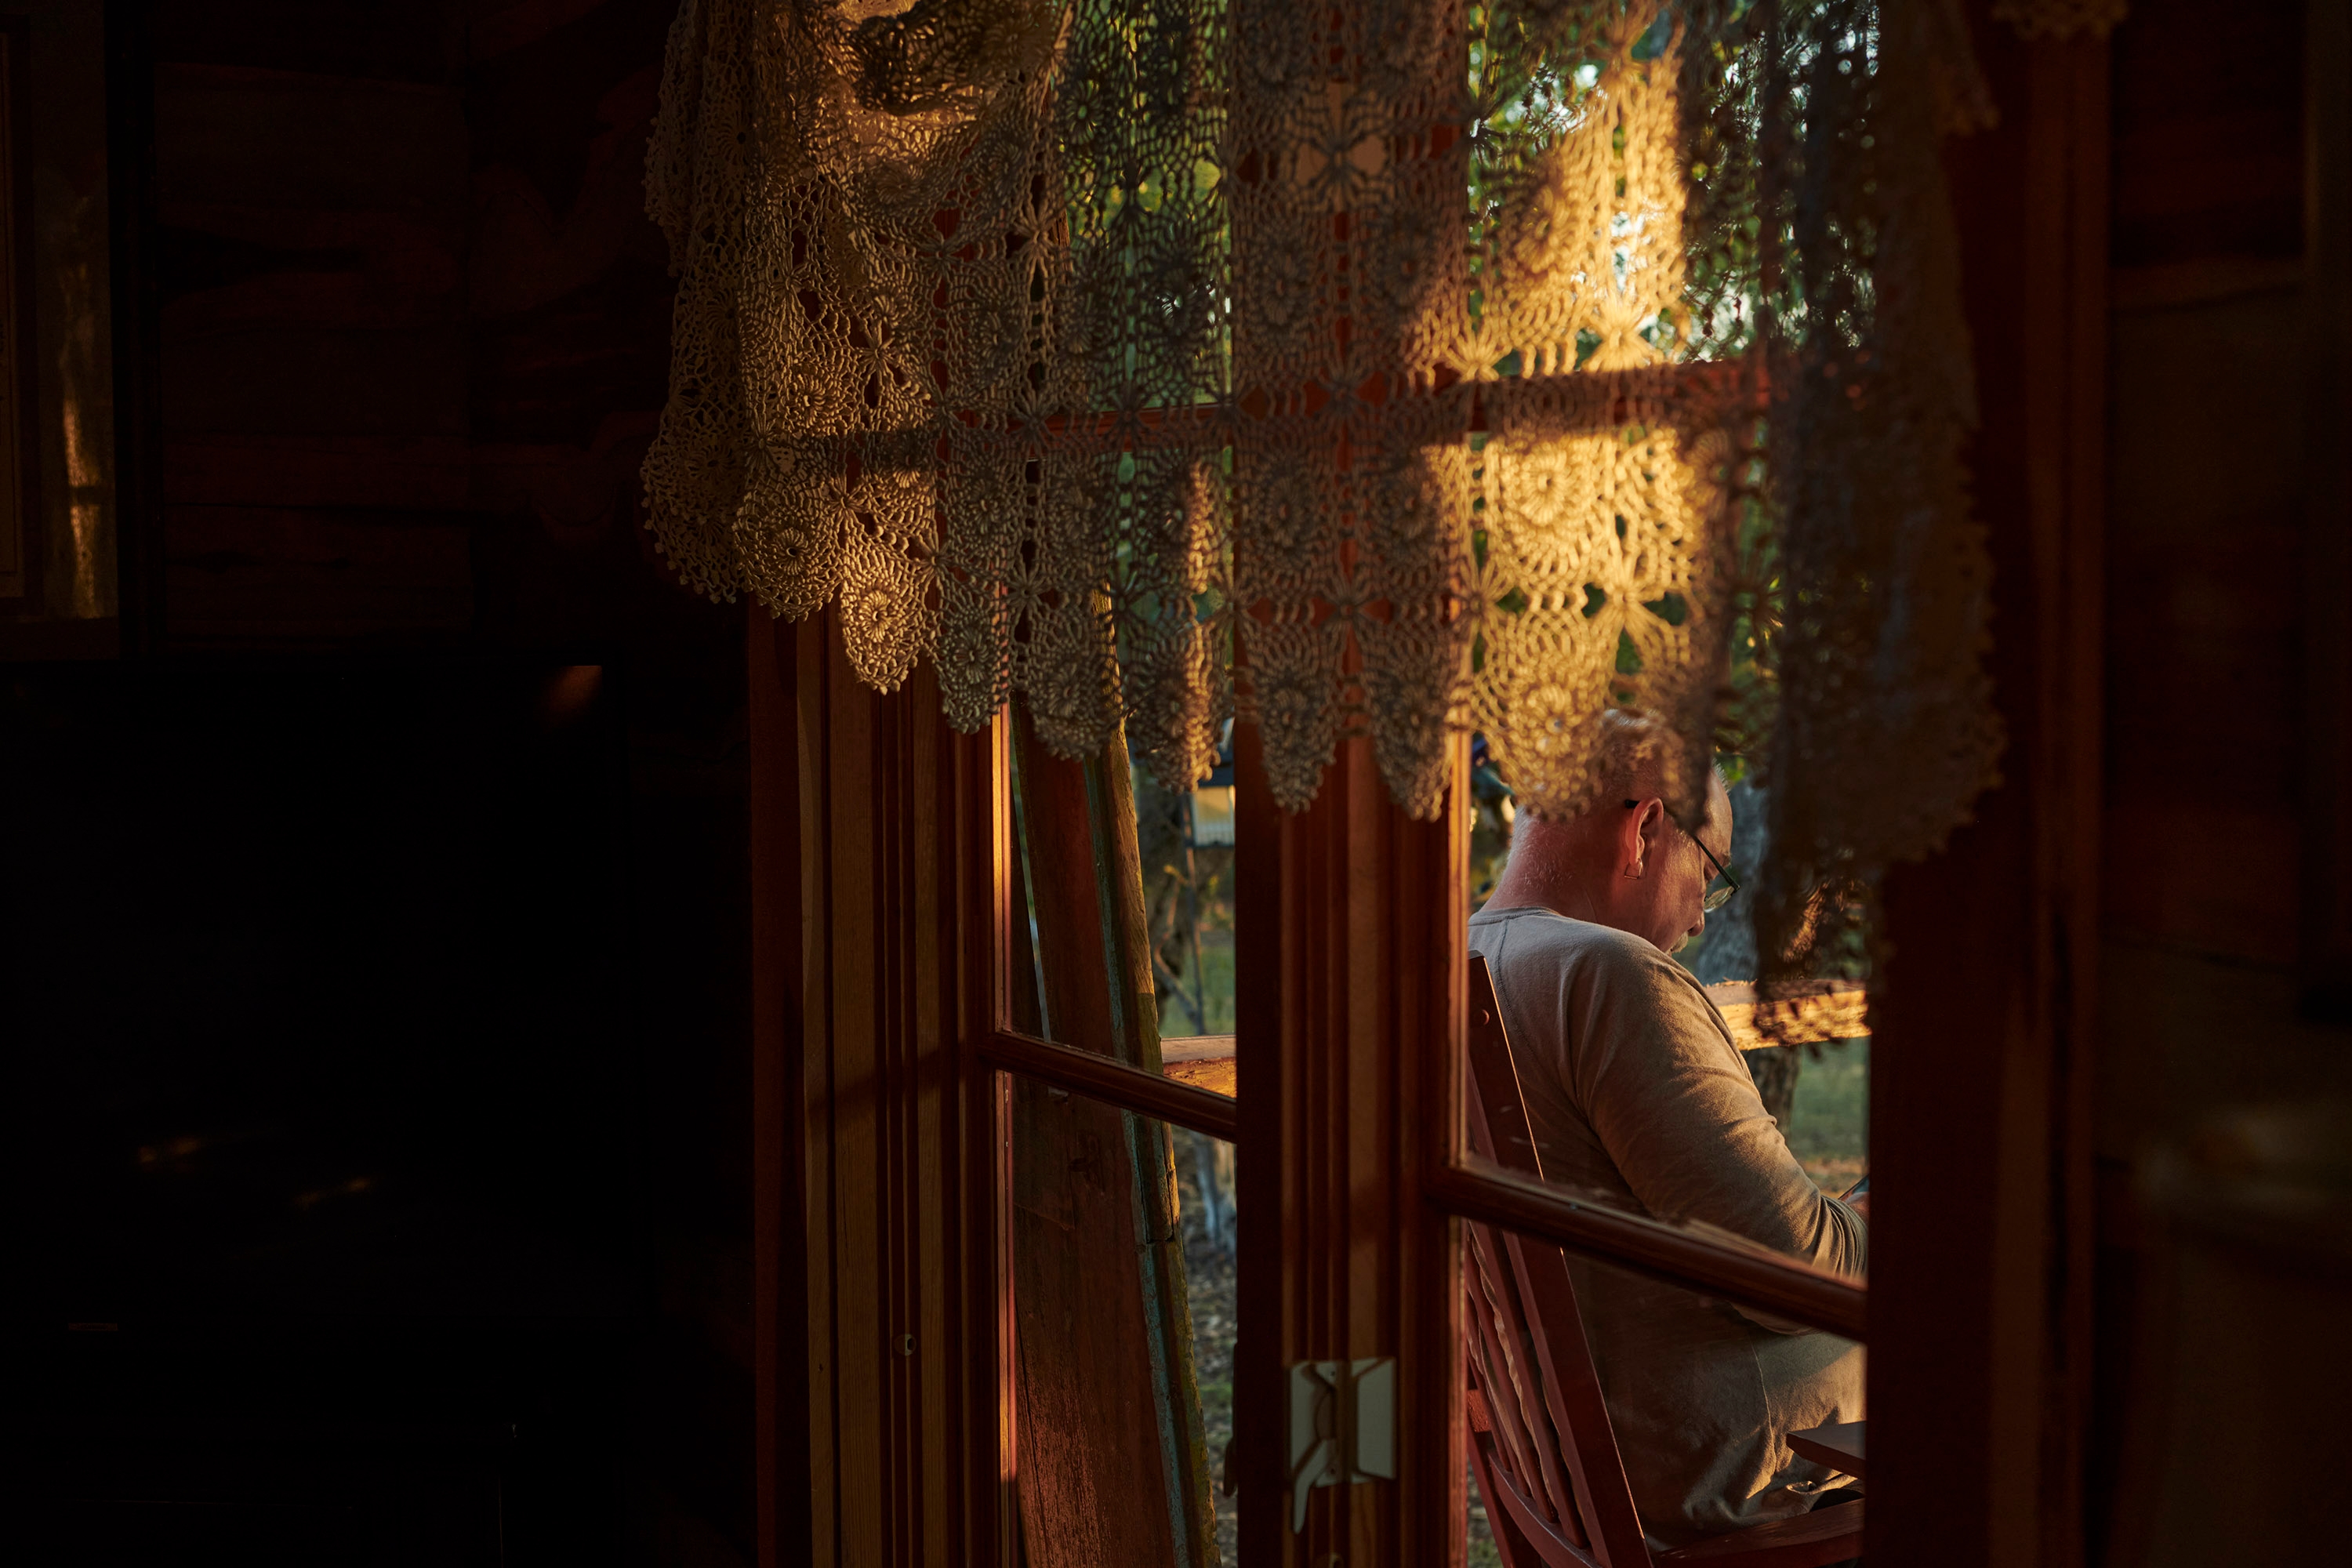 Sunrise through a window of a cabin which shows the photographer's father Steve sitting on the porch.